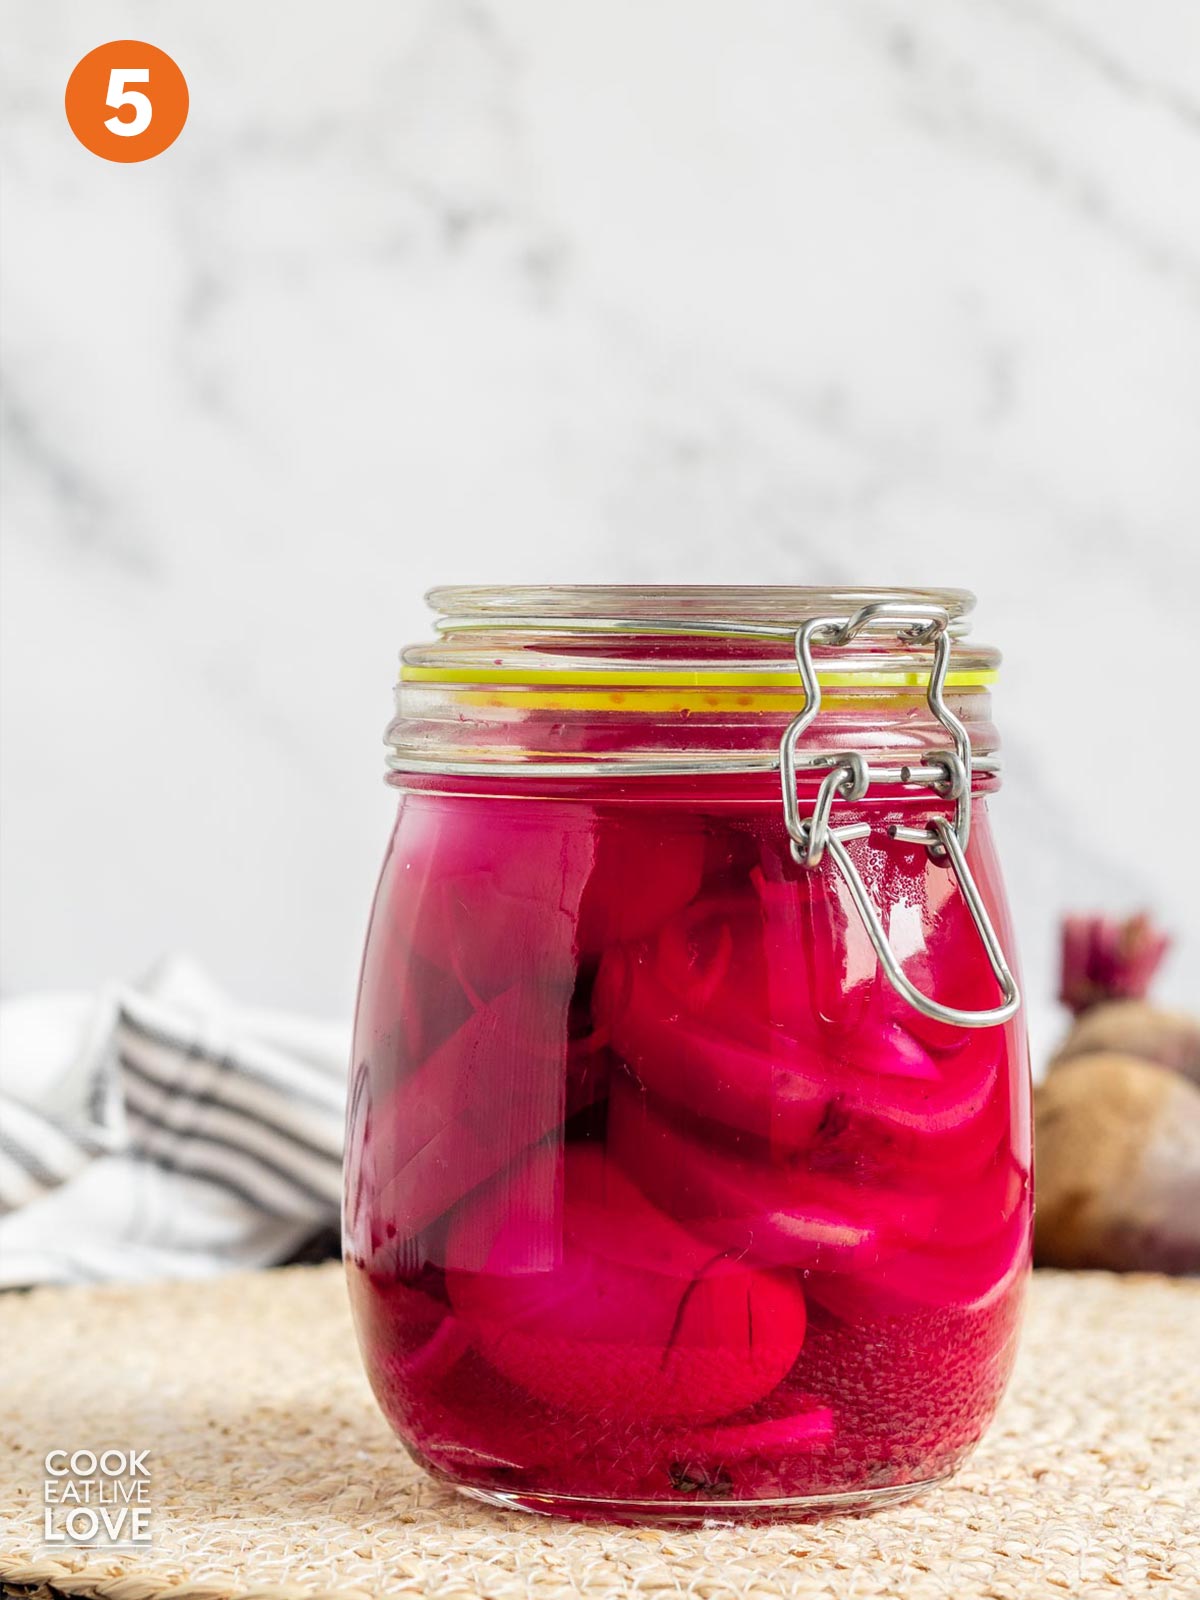 A jar of pickled beets ready for the refrigerator.